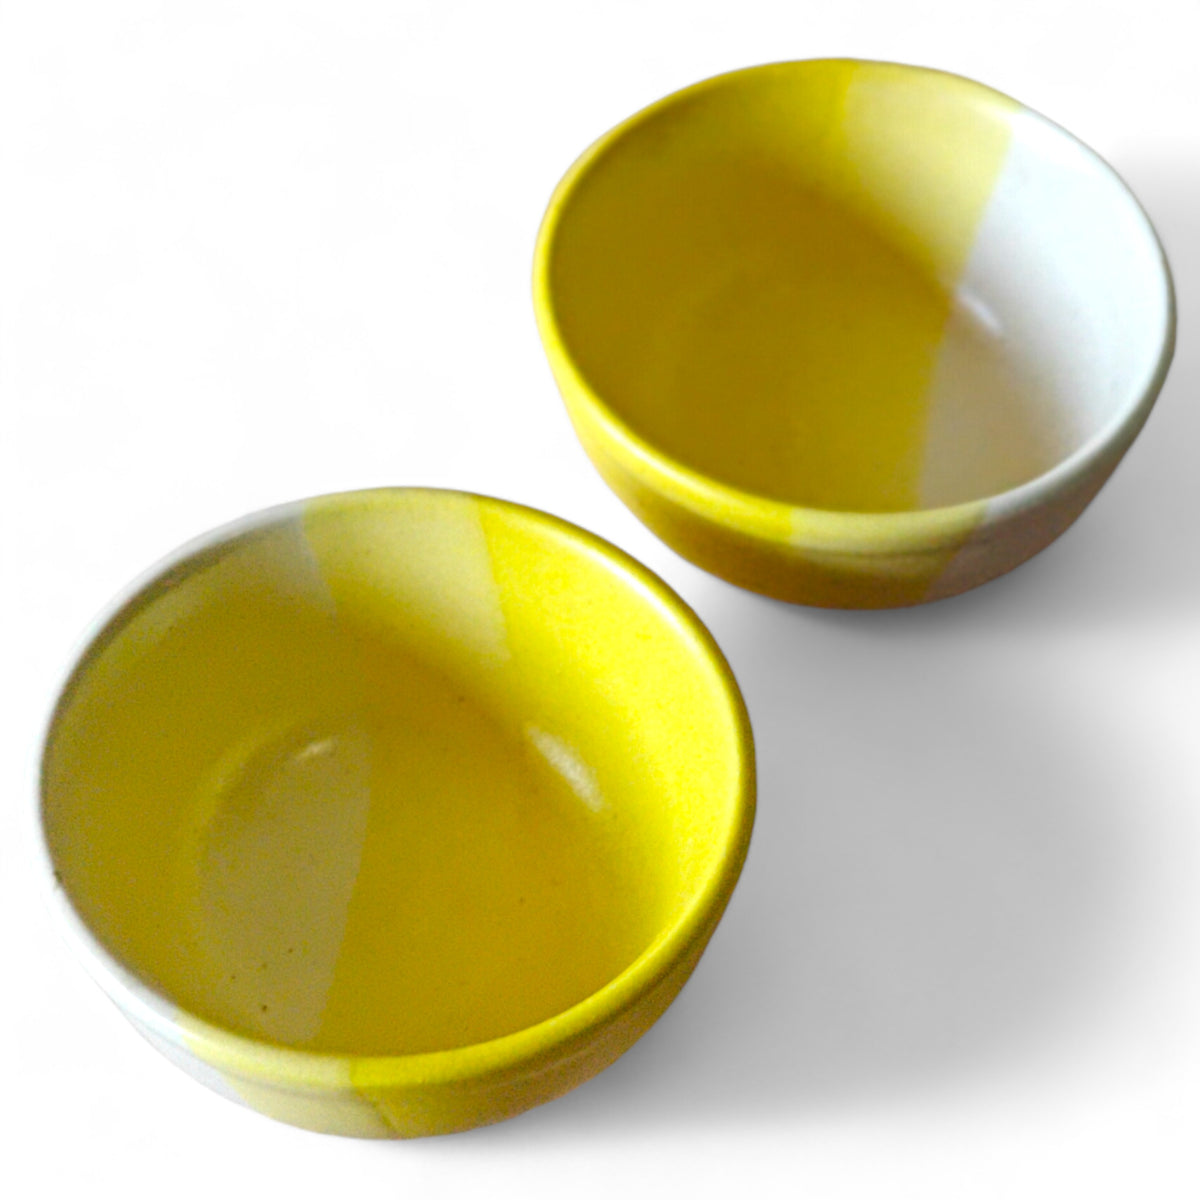 Triple Yellow Trouble: Bowl-ing Over Boredom with a Splash of Sunshine!